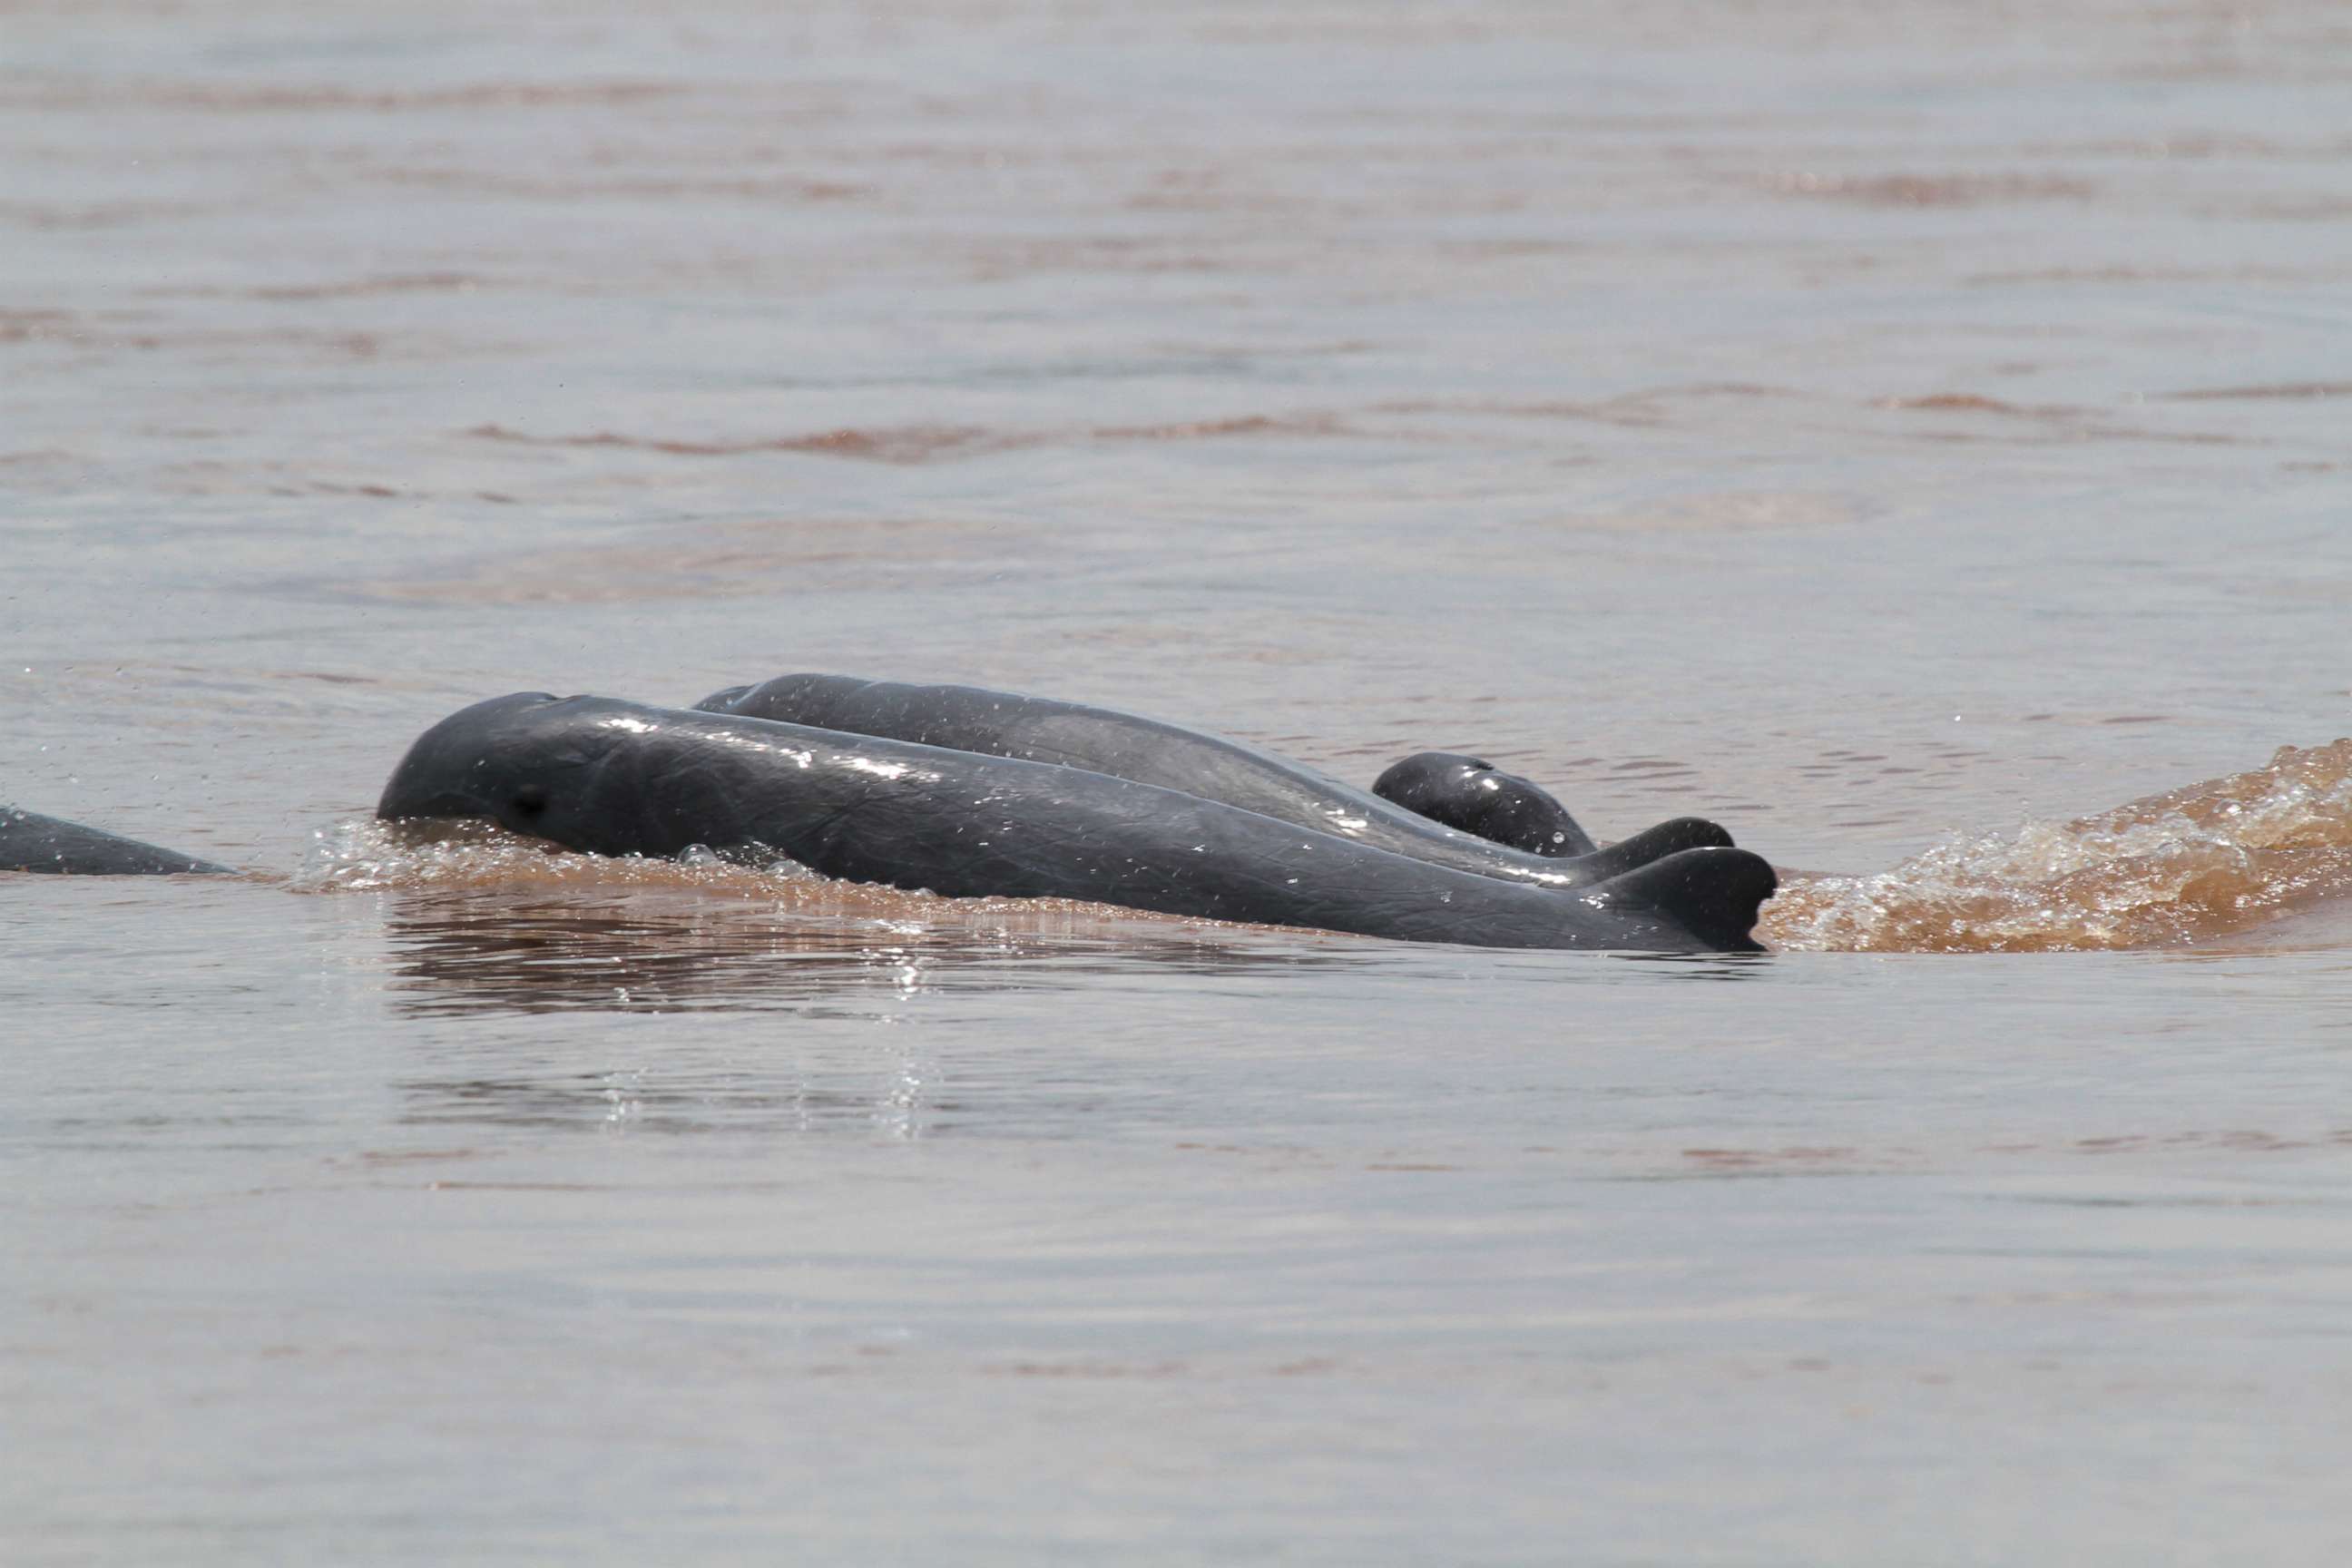 PHOTO: Irrawaddy dolphins surface in Cambodia's Mekong river.